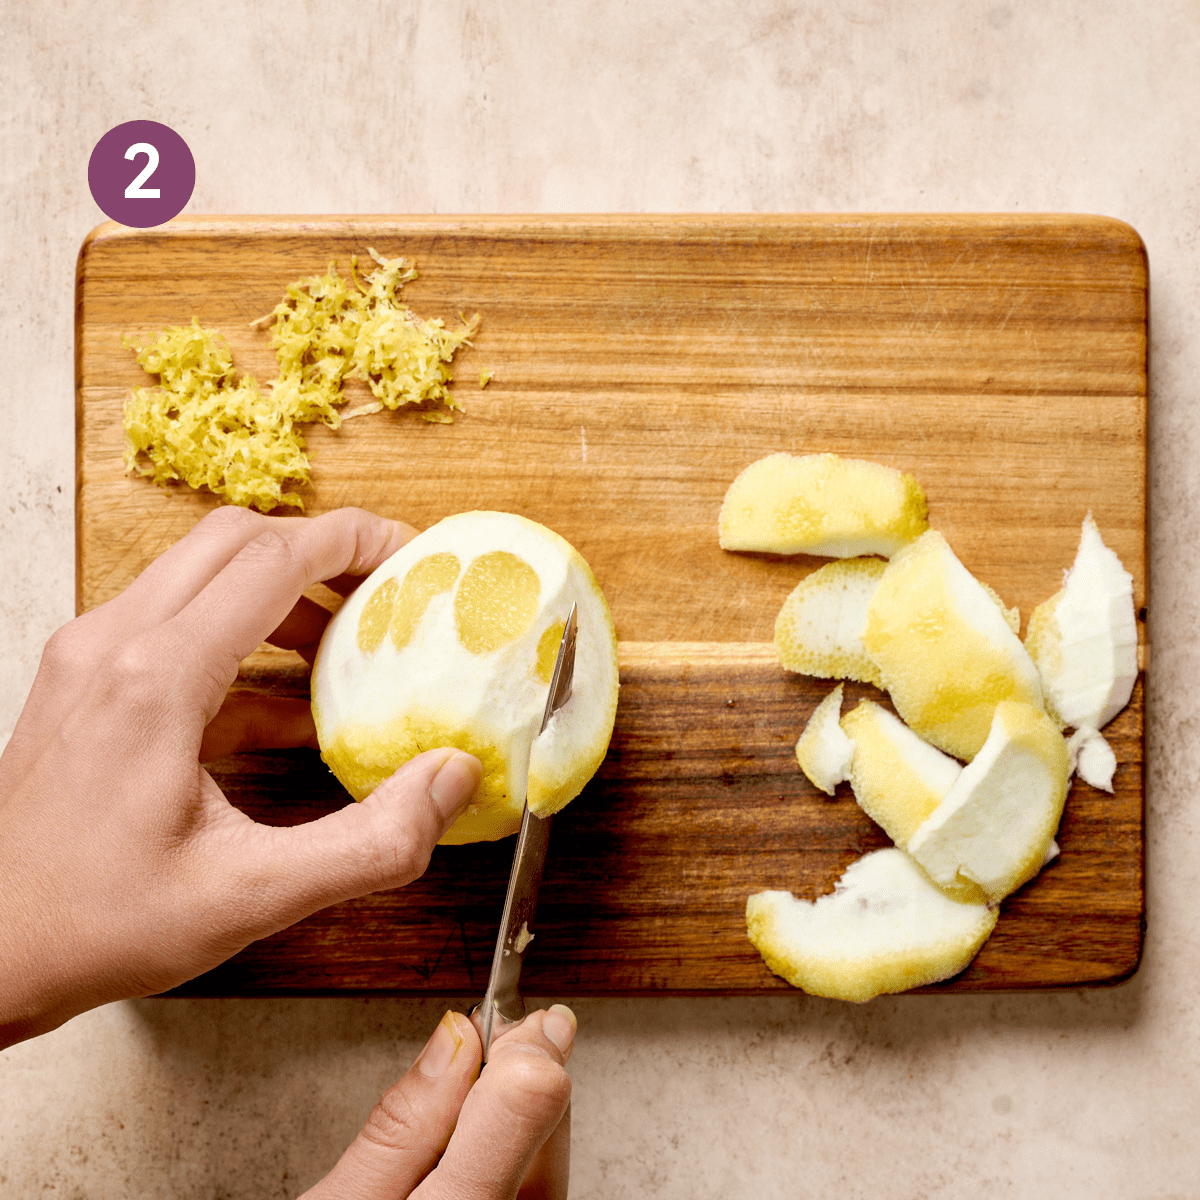 woman's hands using a knife to peel a zested lemon on a wooden cutting board.